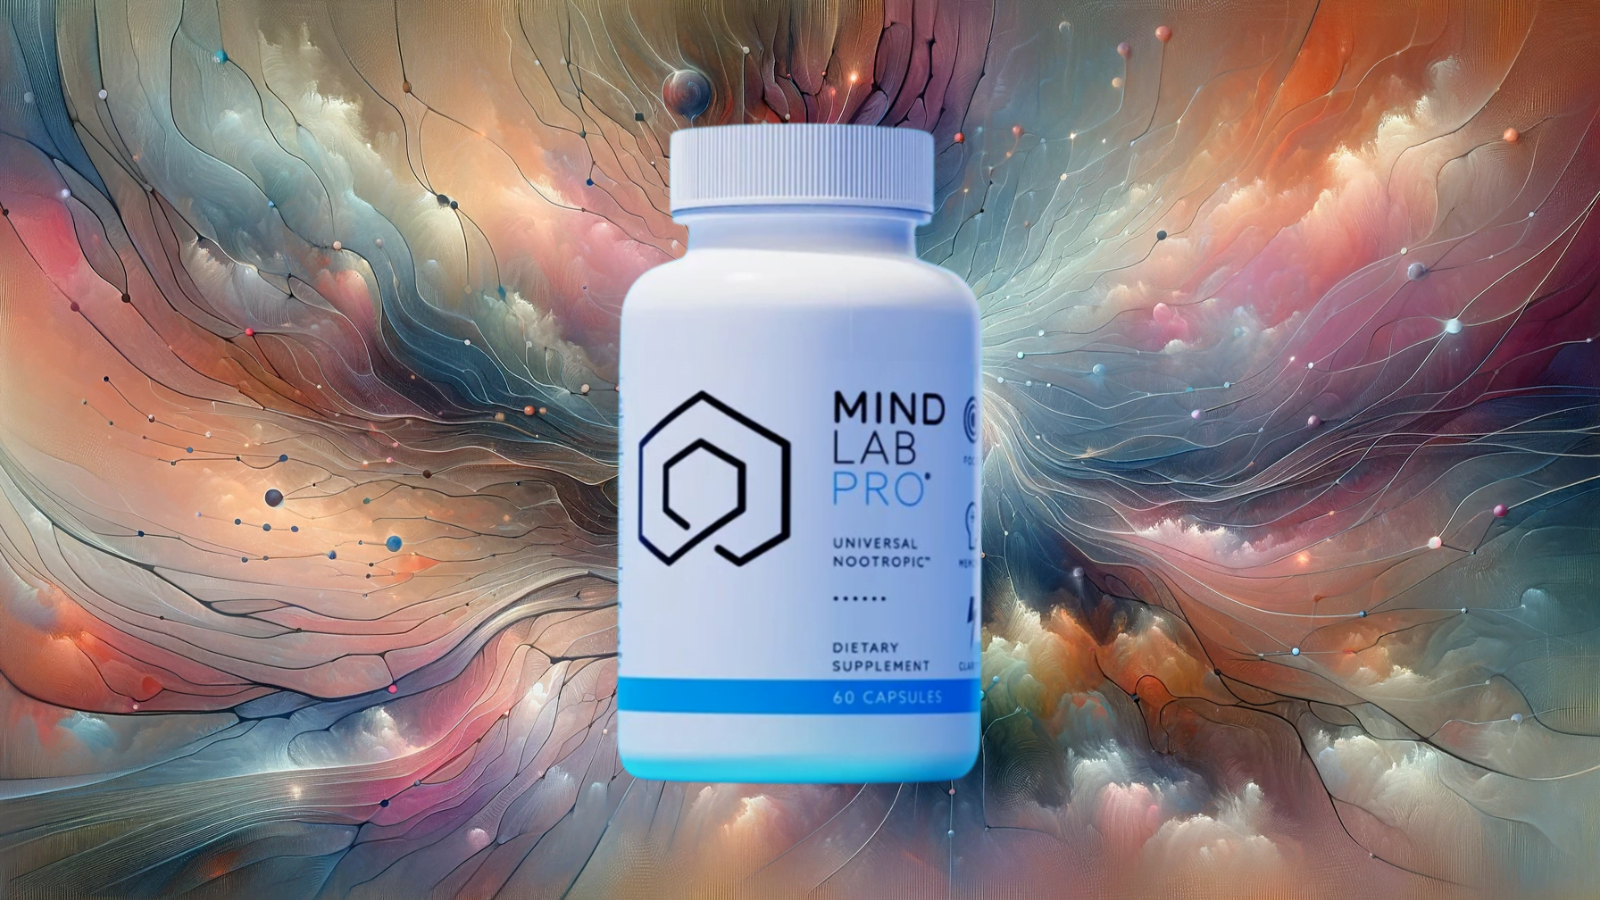 Review and analysis of Mind Lab Pro's effectiveness in enhancing cognitive functions